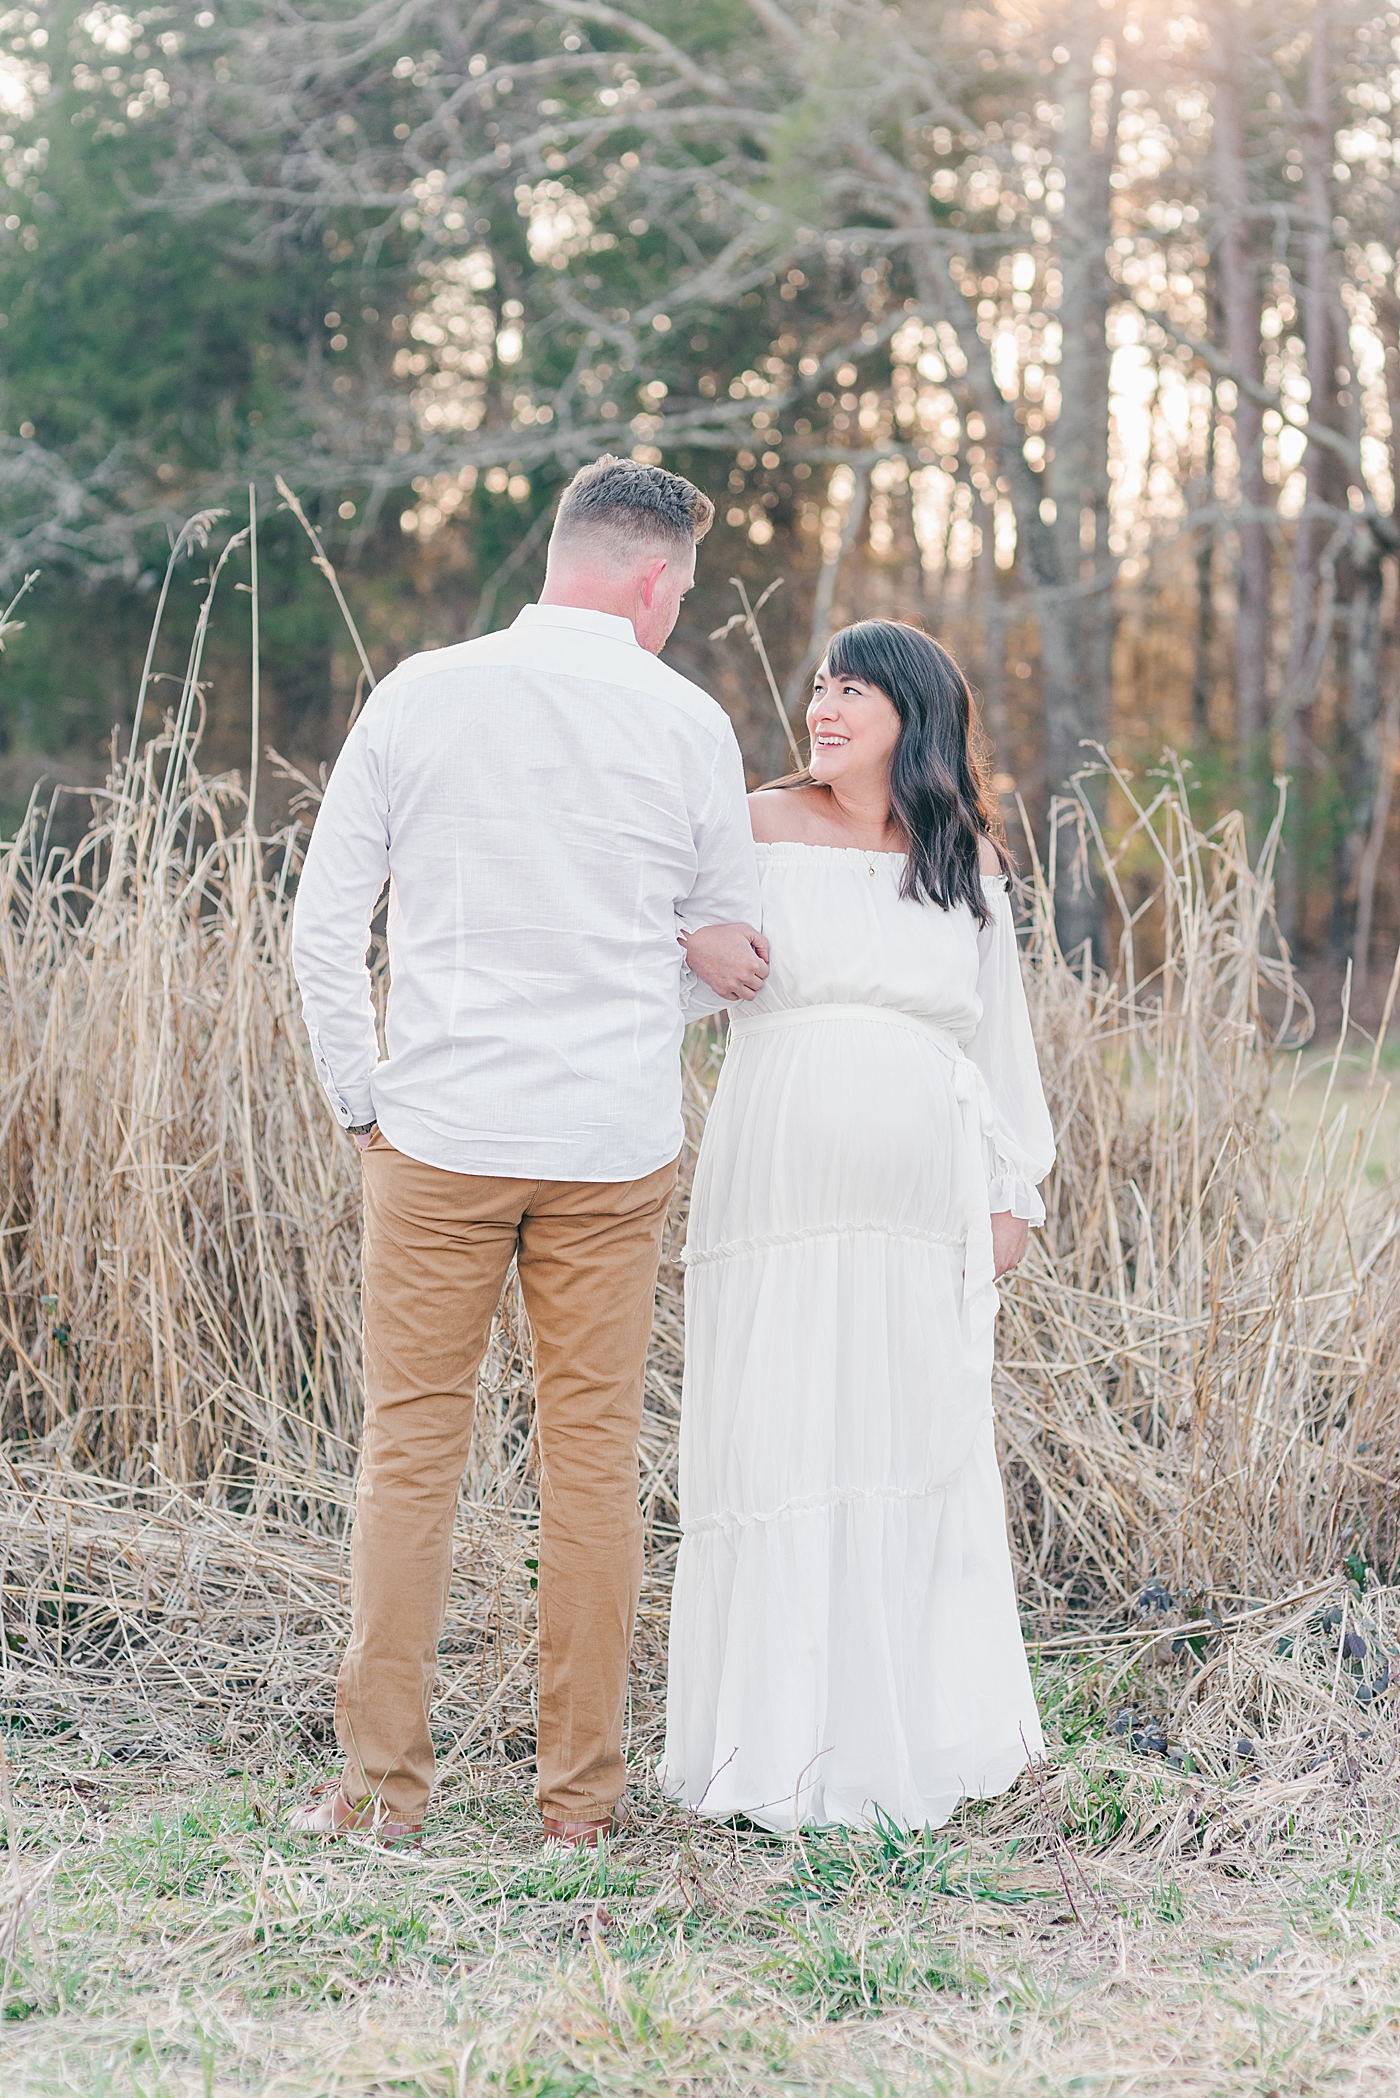 Maternity photos in field at Fisher Farm Park | Photo by Anna Wisjo Photography